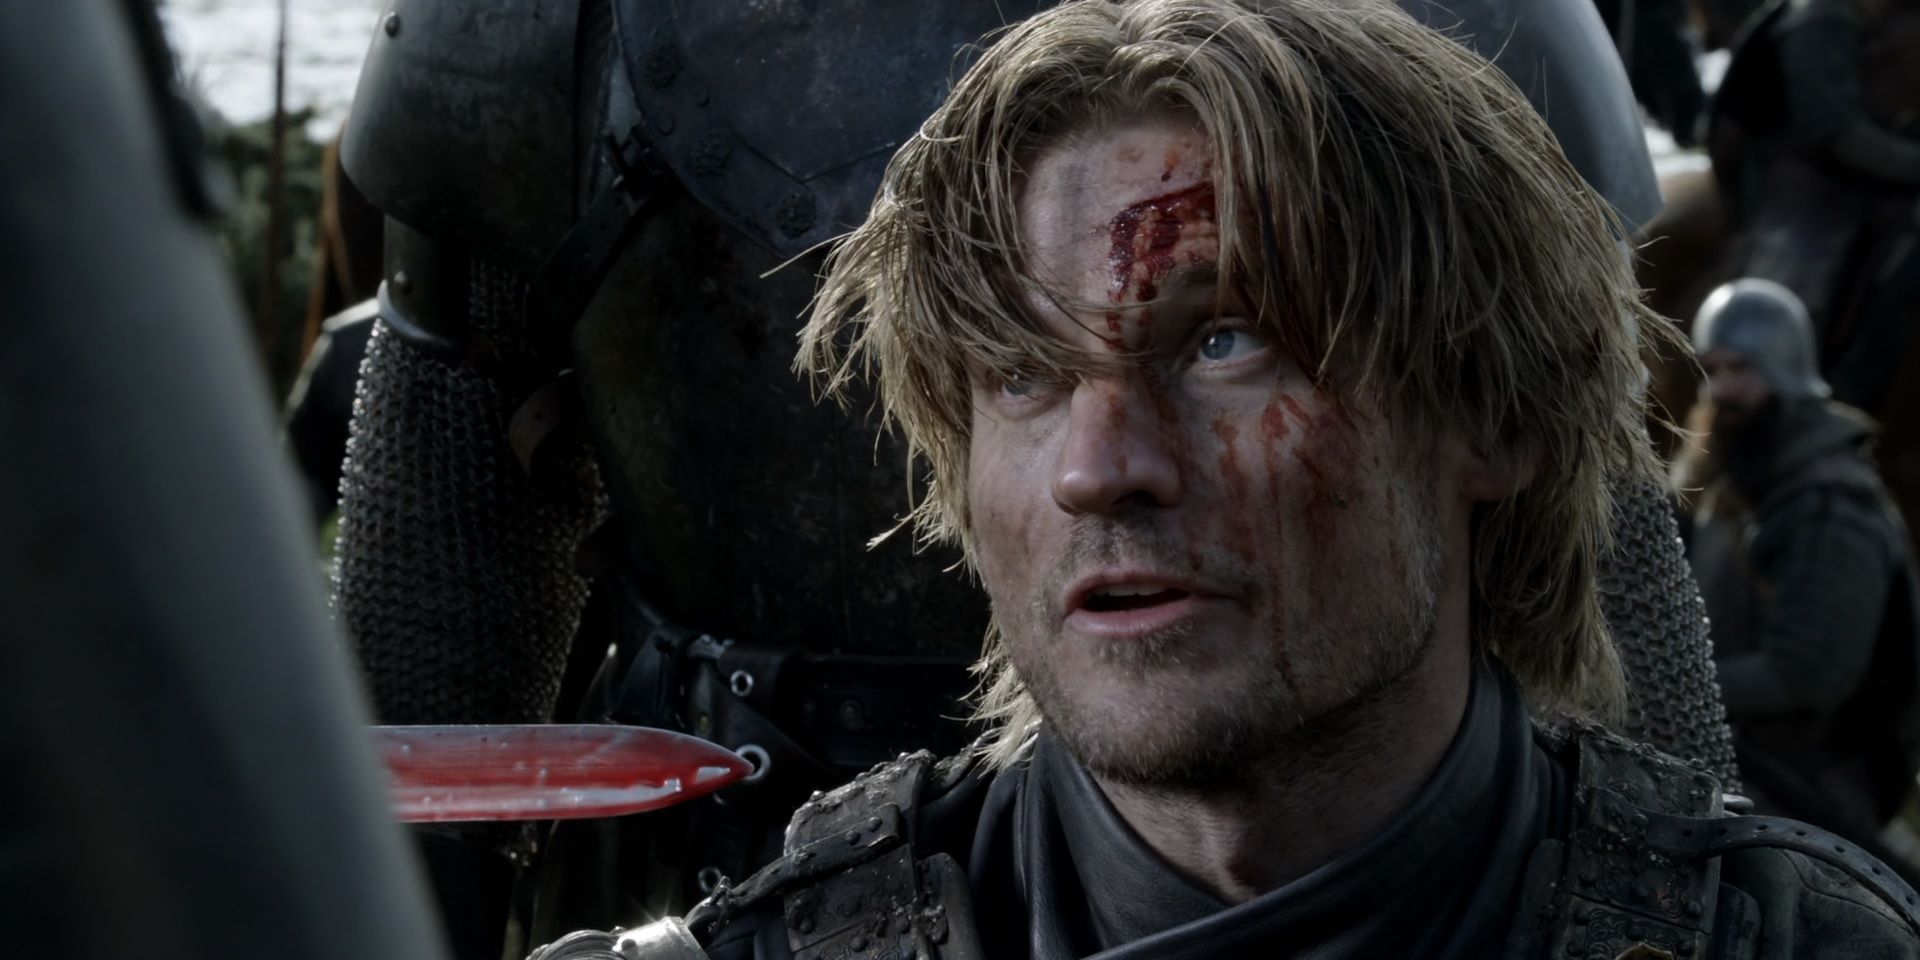 Jaime Lannister captured following the Battle of Whispering Wood.